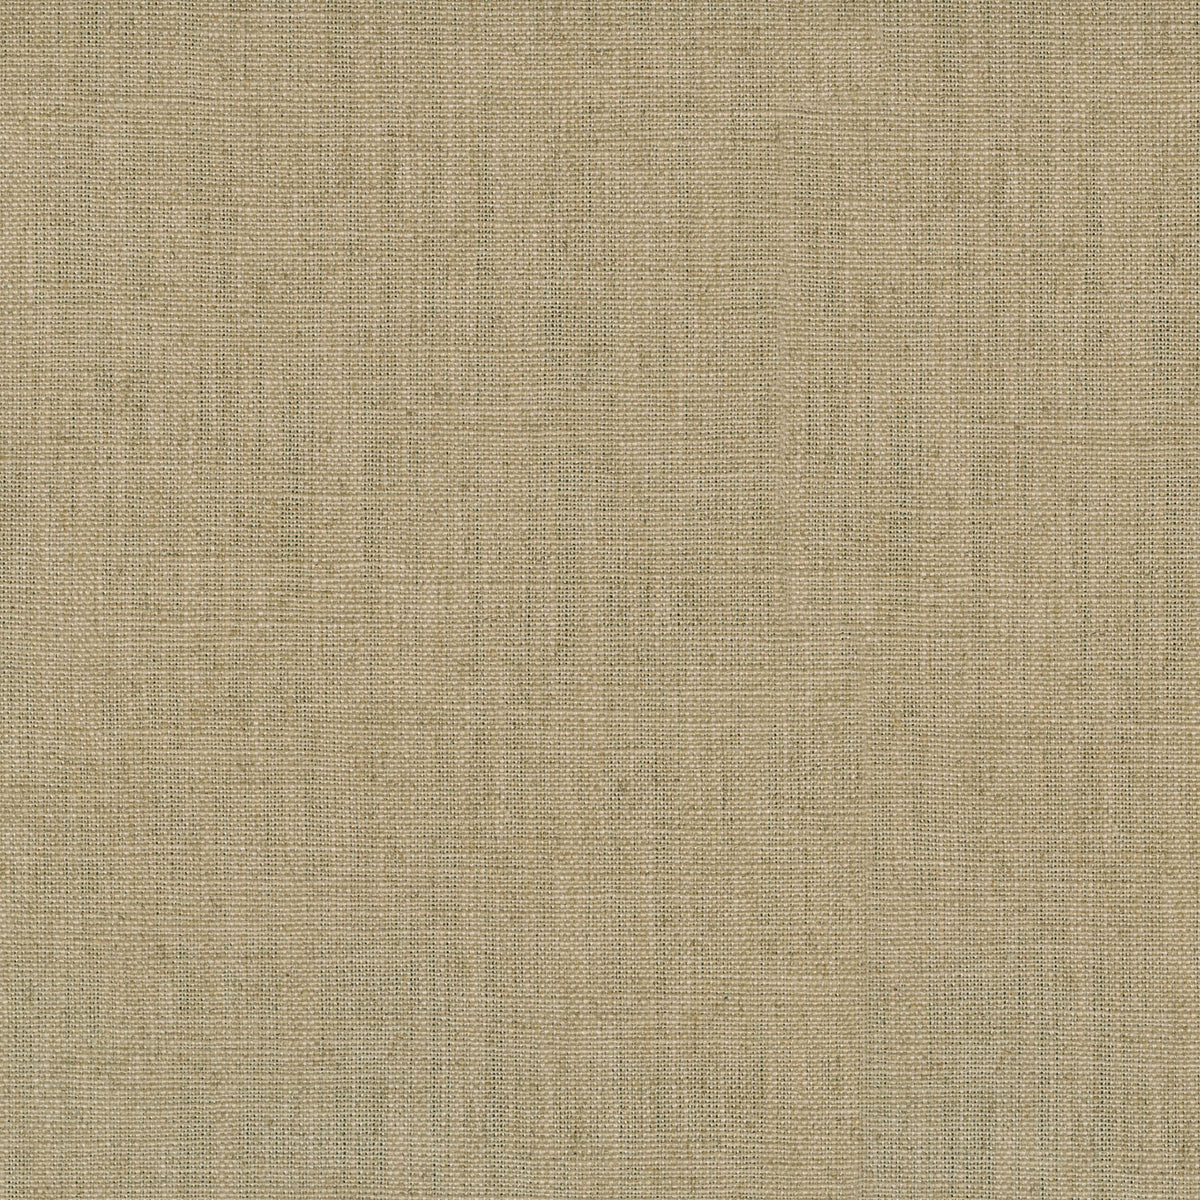 Performance + Miles - Linen 409042 Upholstery Fabric